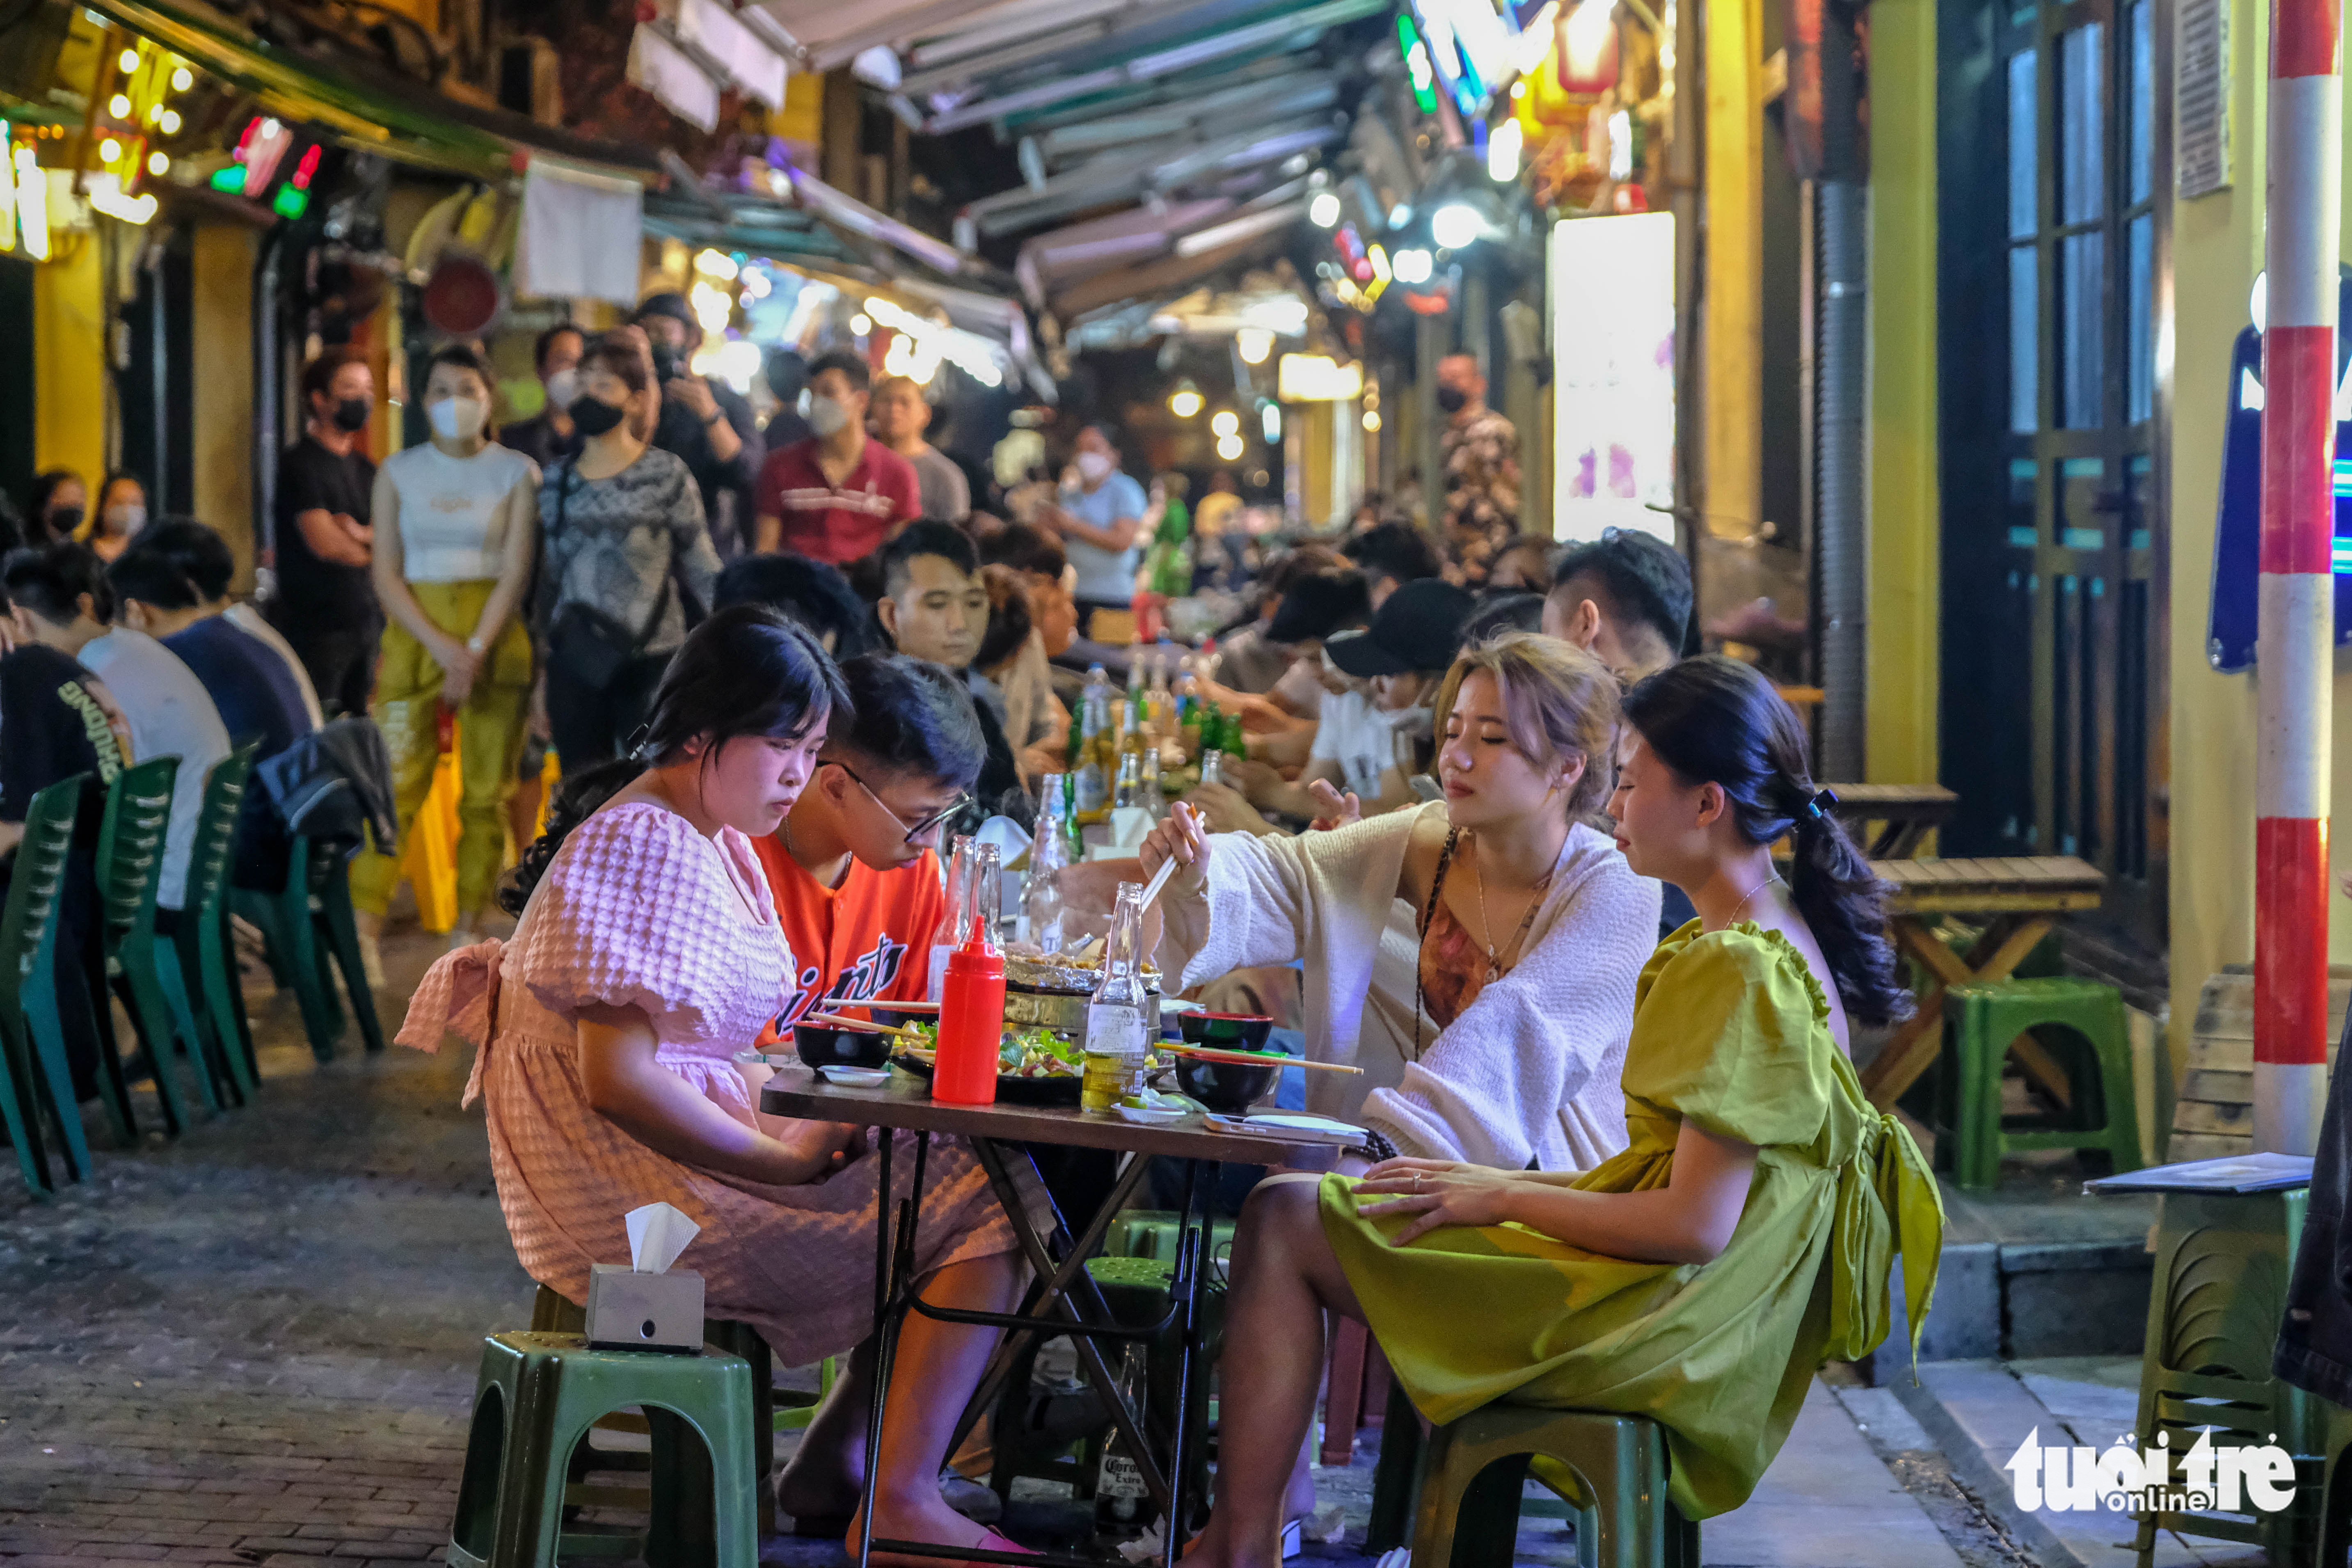 People enjoy nightlife at a corner of Hanoi Old Quarter in Hoan Kiem District, Hanoi on March 15, 2022 after food and beverage establishments are allowed to operate after 9:00 pm. Photo: Ha Quan / Tuoi Tre